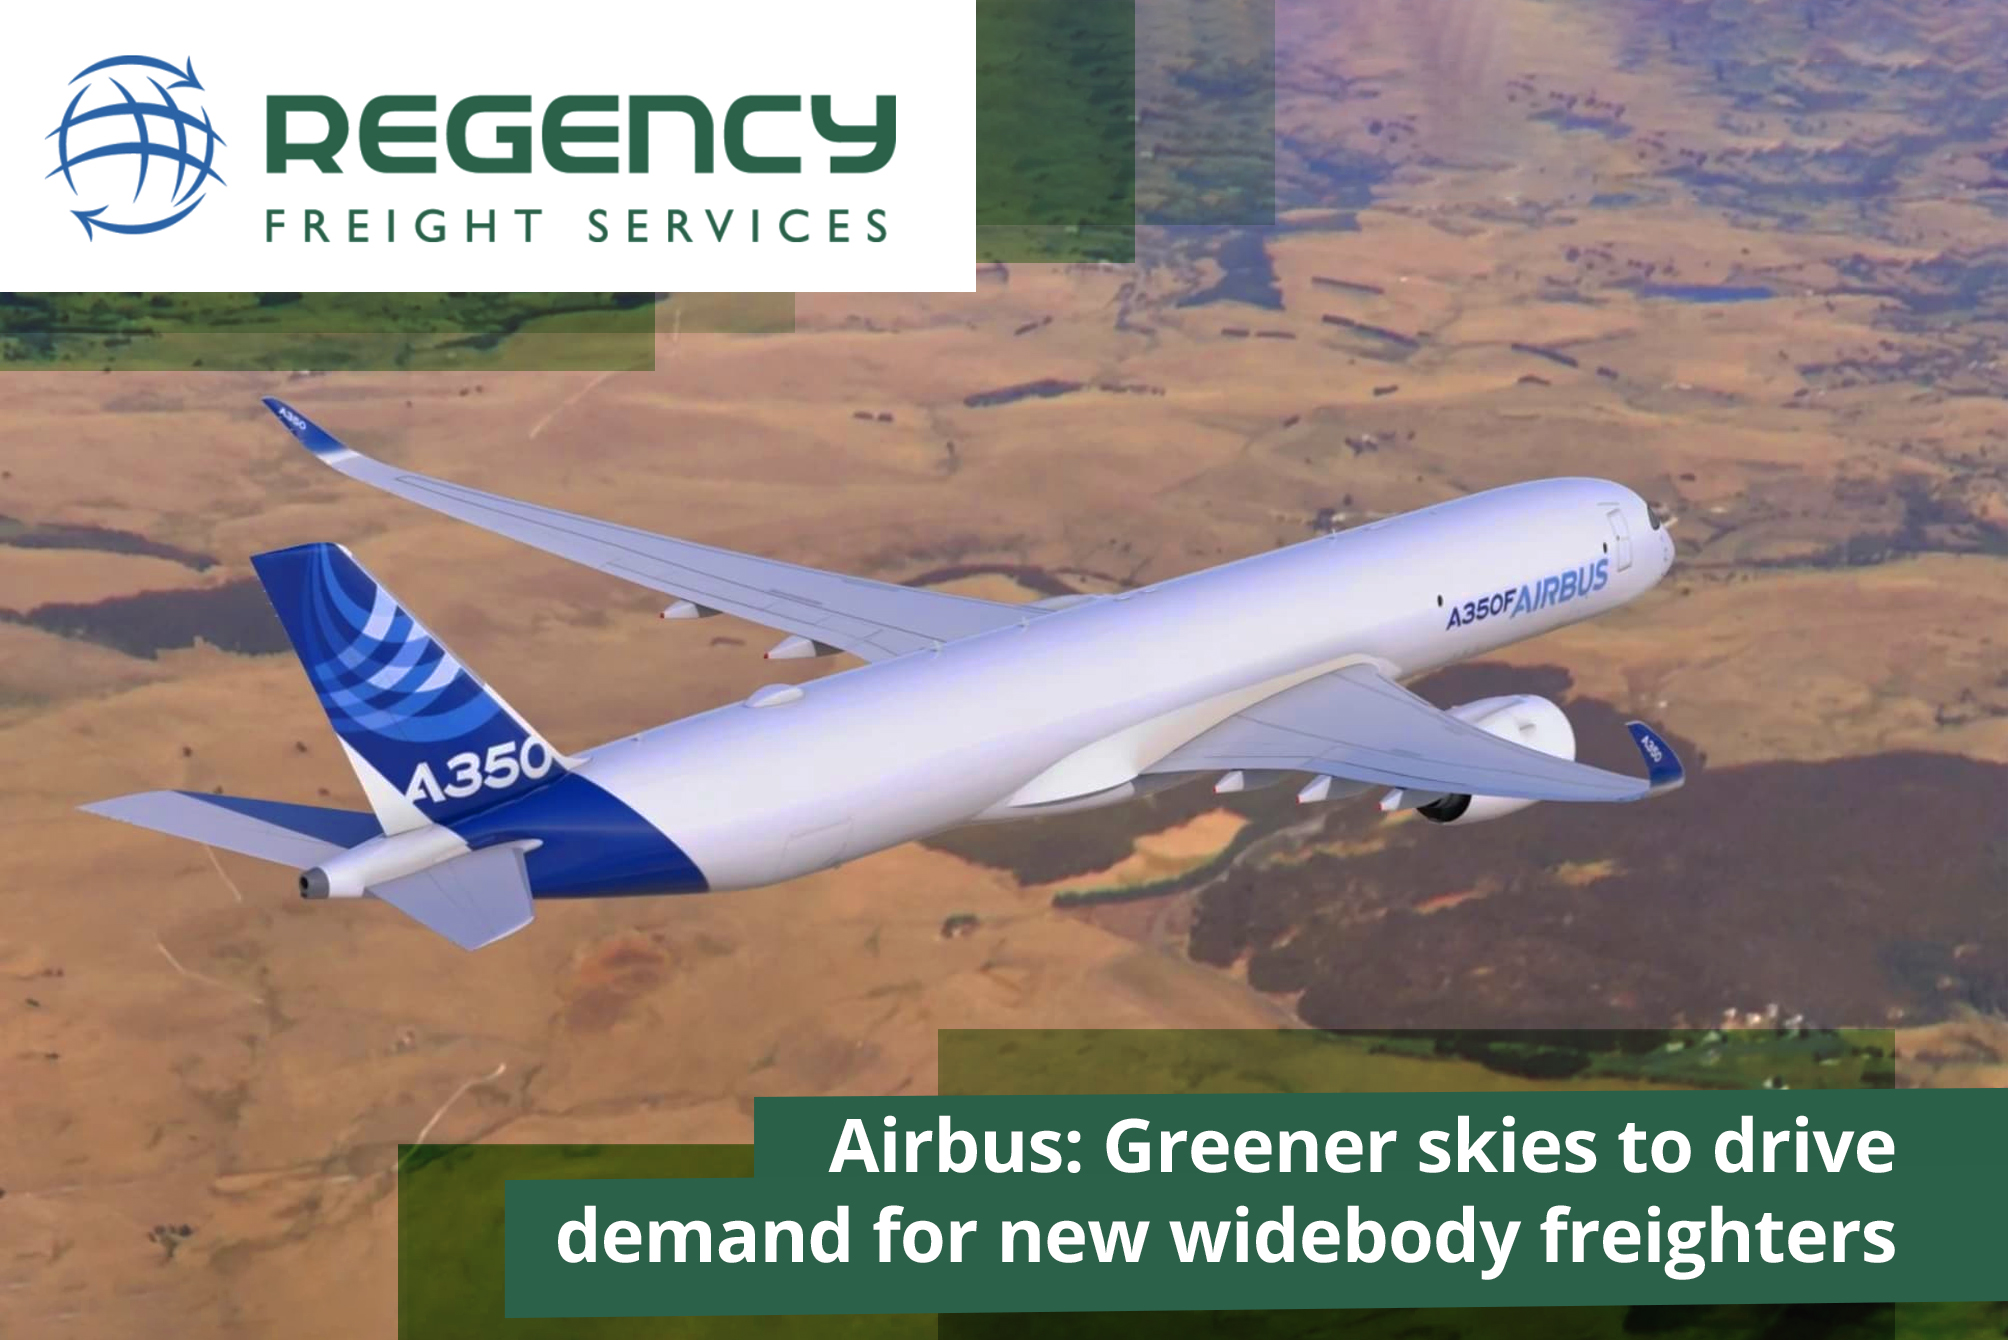 Airbus: Greener skies to drive demand for new widebody freighters